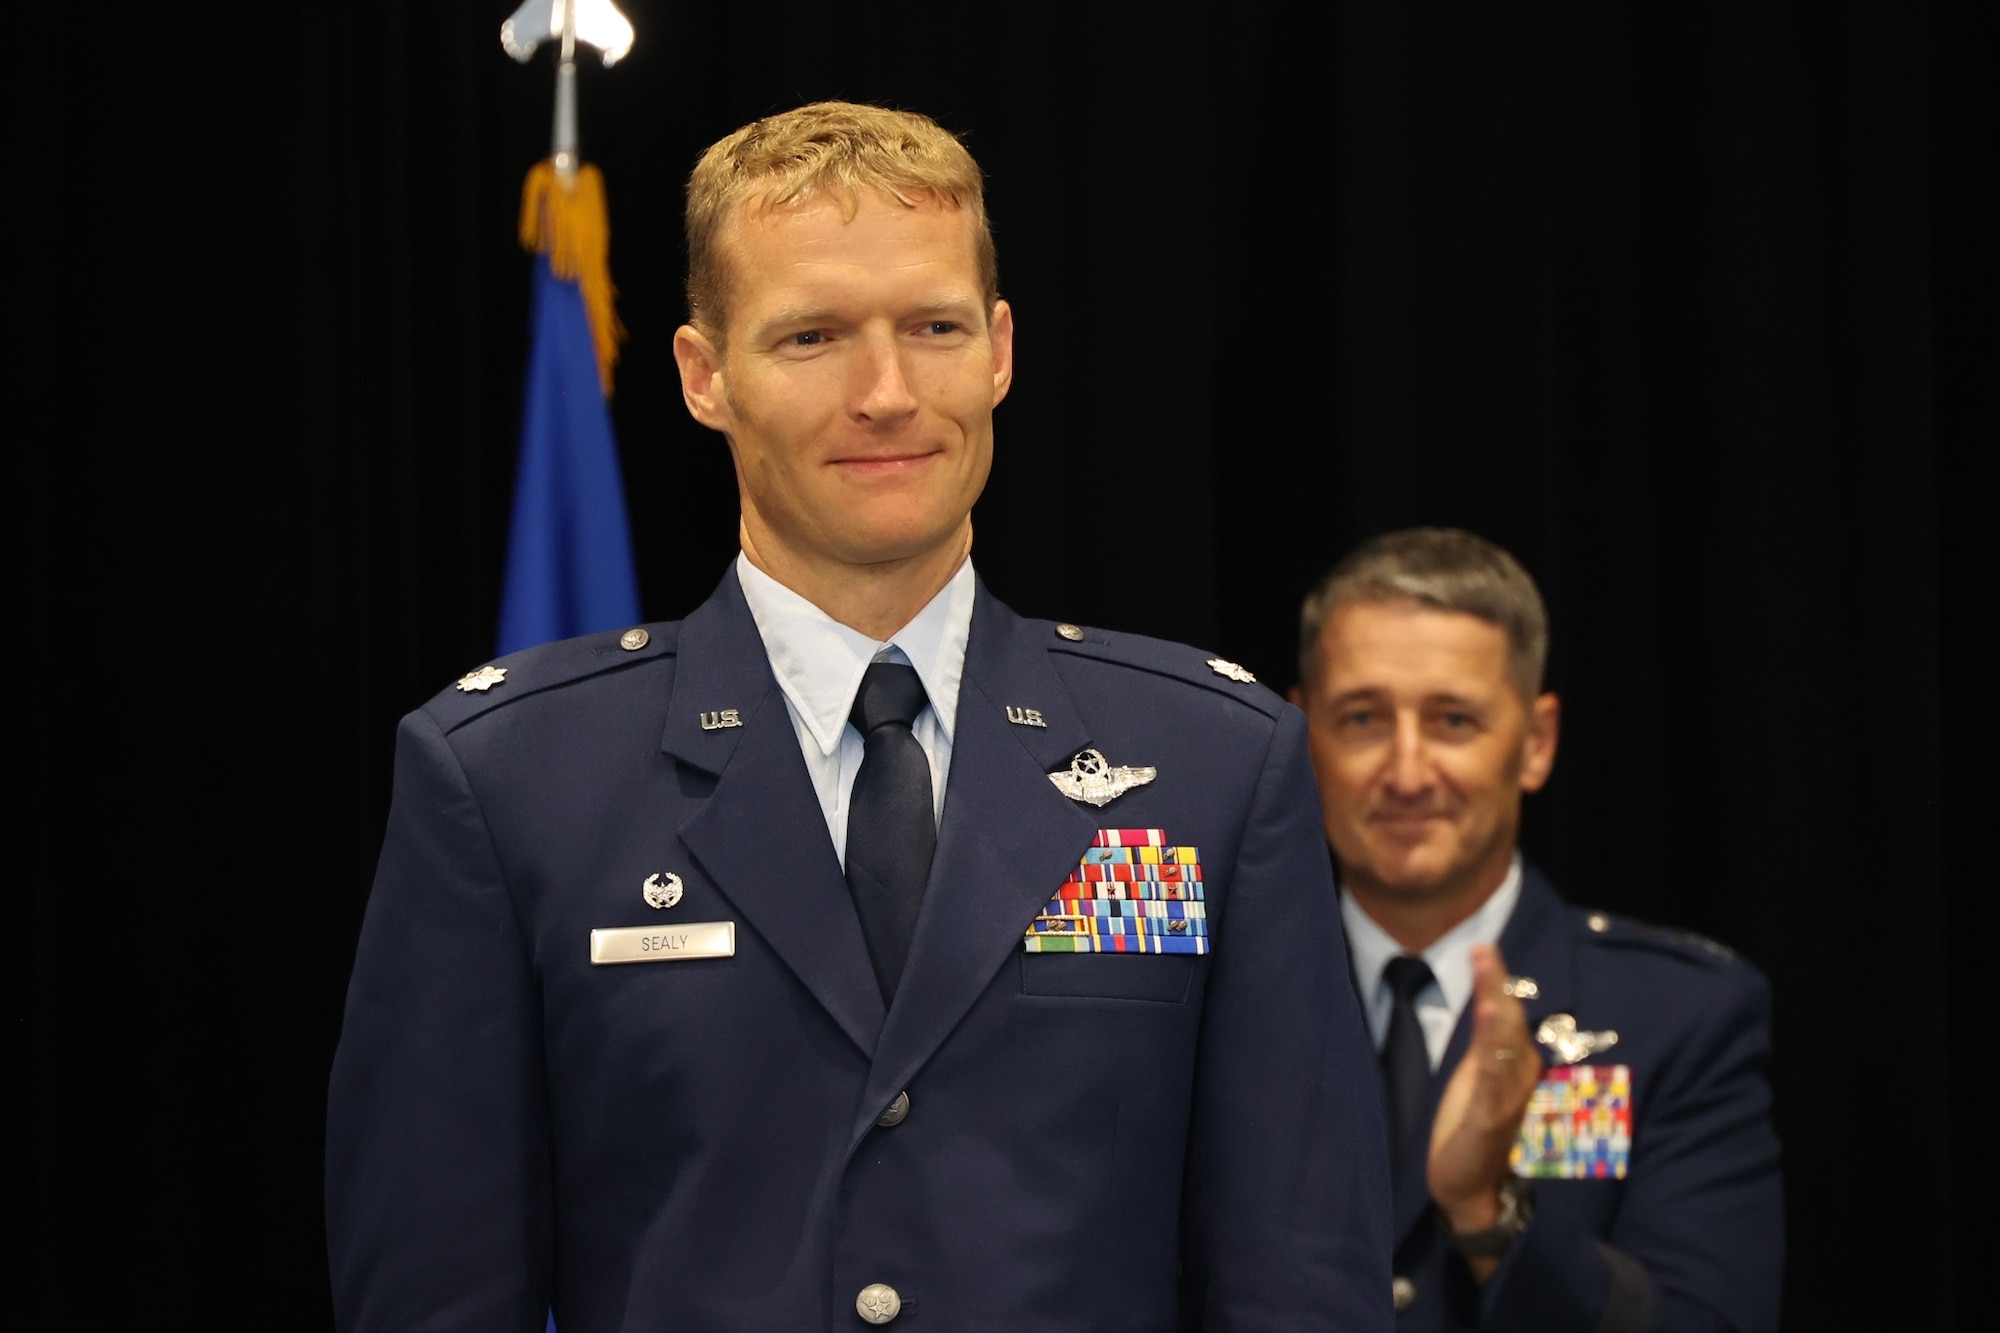 Photos show the passing of the guidon from the outgoing to the incoming AFRCC commander. The Air Force Rescue Coordination Center here held a change of command ceremony on August 1, 2023. Lt. Col. Matthew Mustain relinquished command to Lt. Col. Ryan Sealy. Lt. Gen. Nordhaus, commander of the Continental U.S. North American Aerospace Defense Region – First Air Force (Air Forces Northern and Air Forces Space) presided over the ceremony.